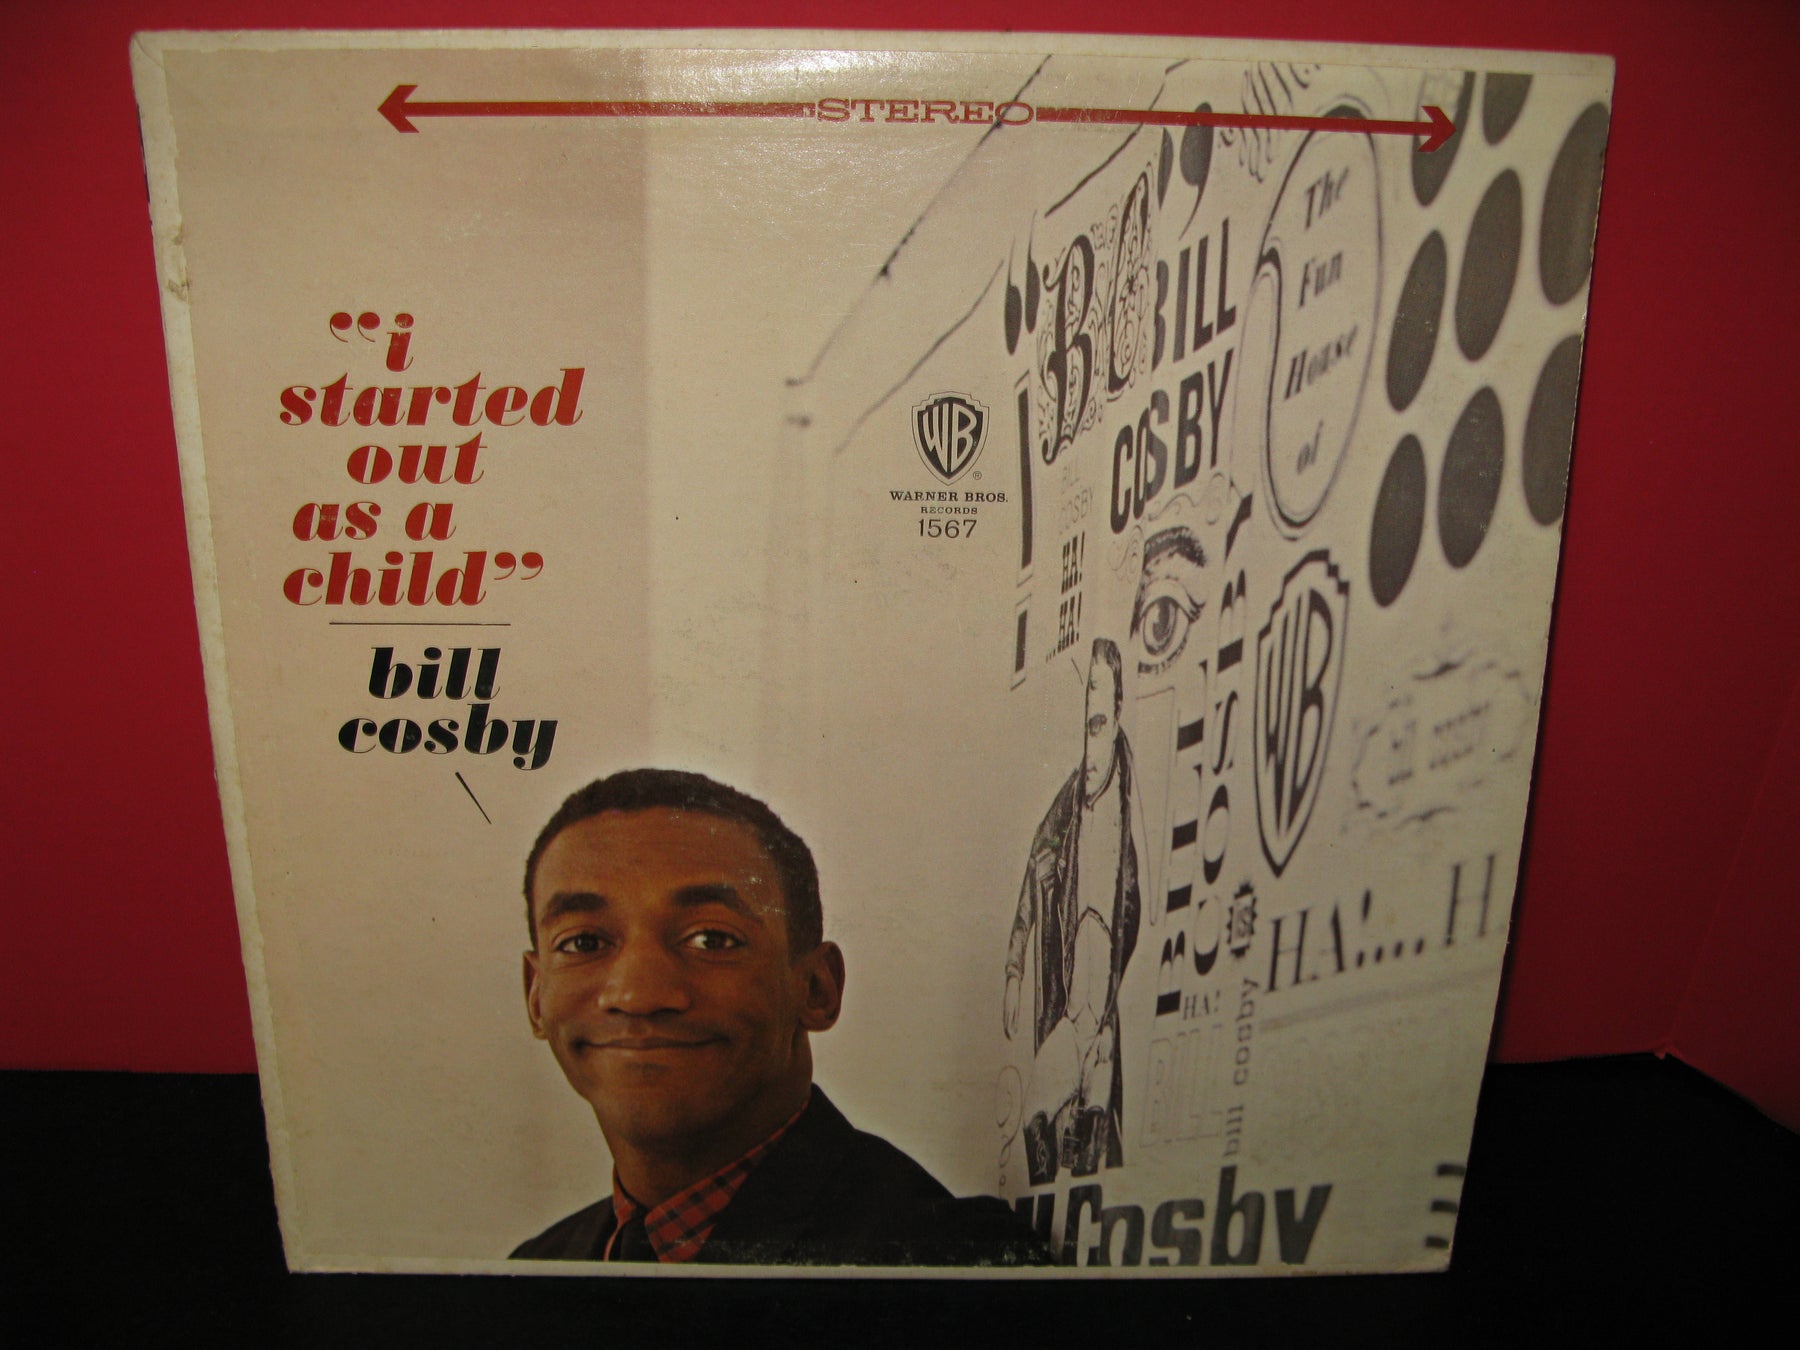 Bill Cosby - I Started Out as A Child Vinyl Record